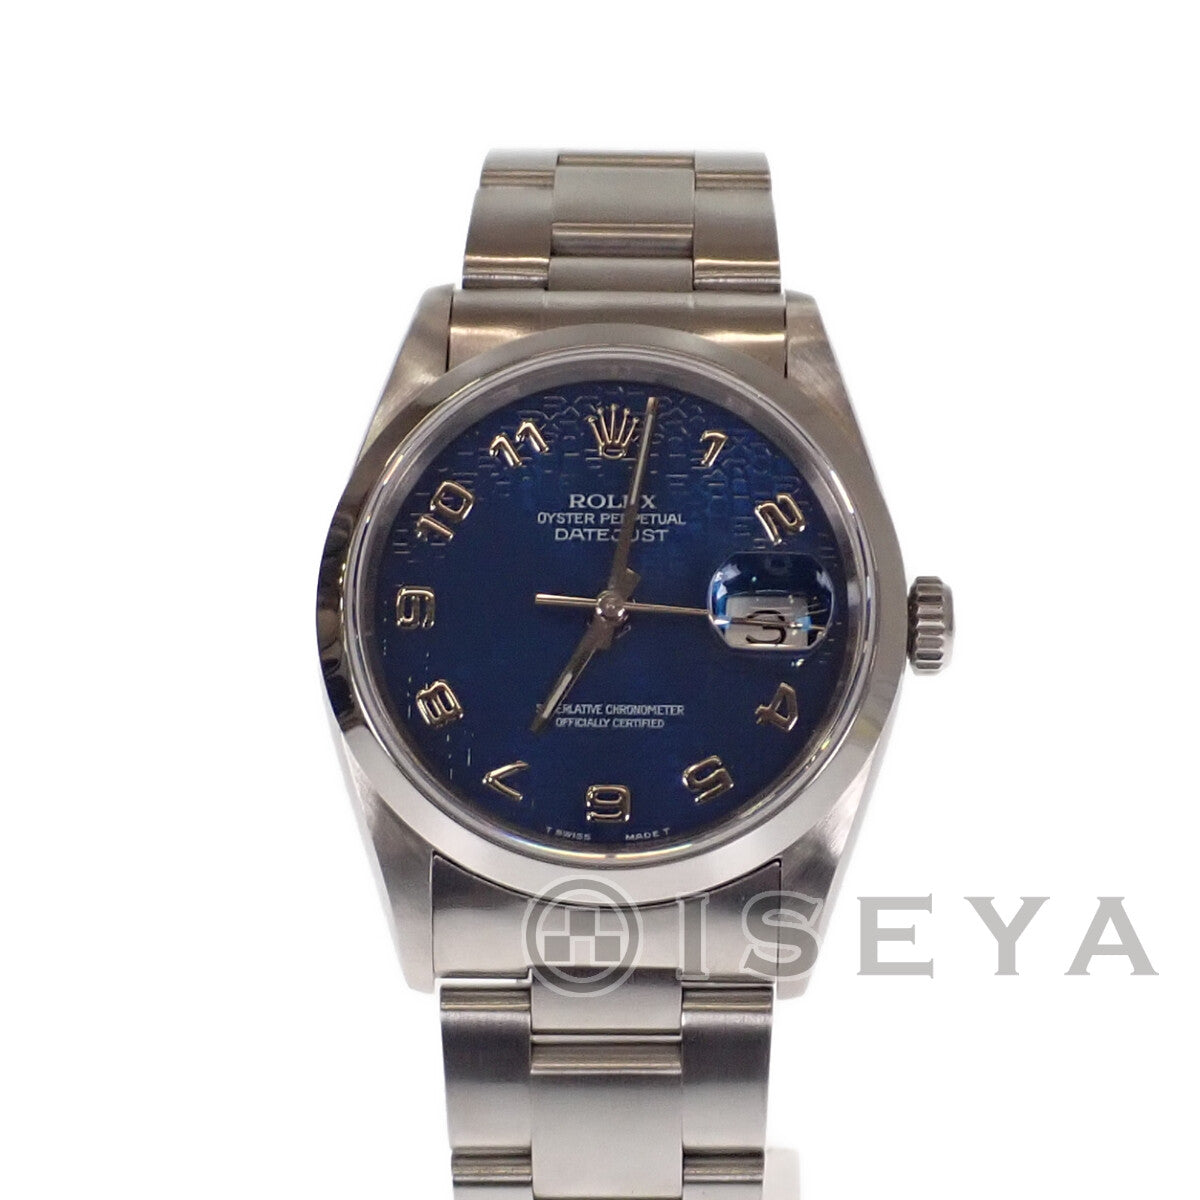 ROLEX Datejust Men's Stainless Steel Wristwatch with Blue Dial - Used 16200.0